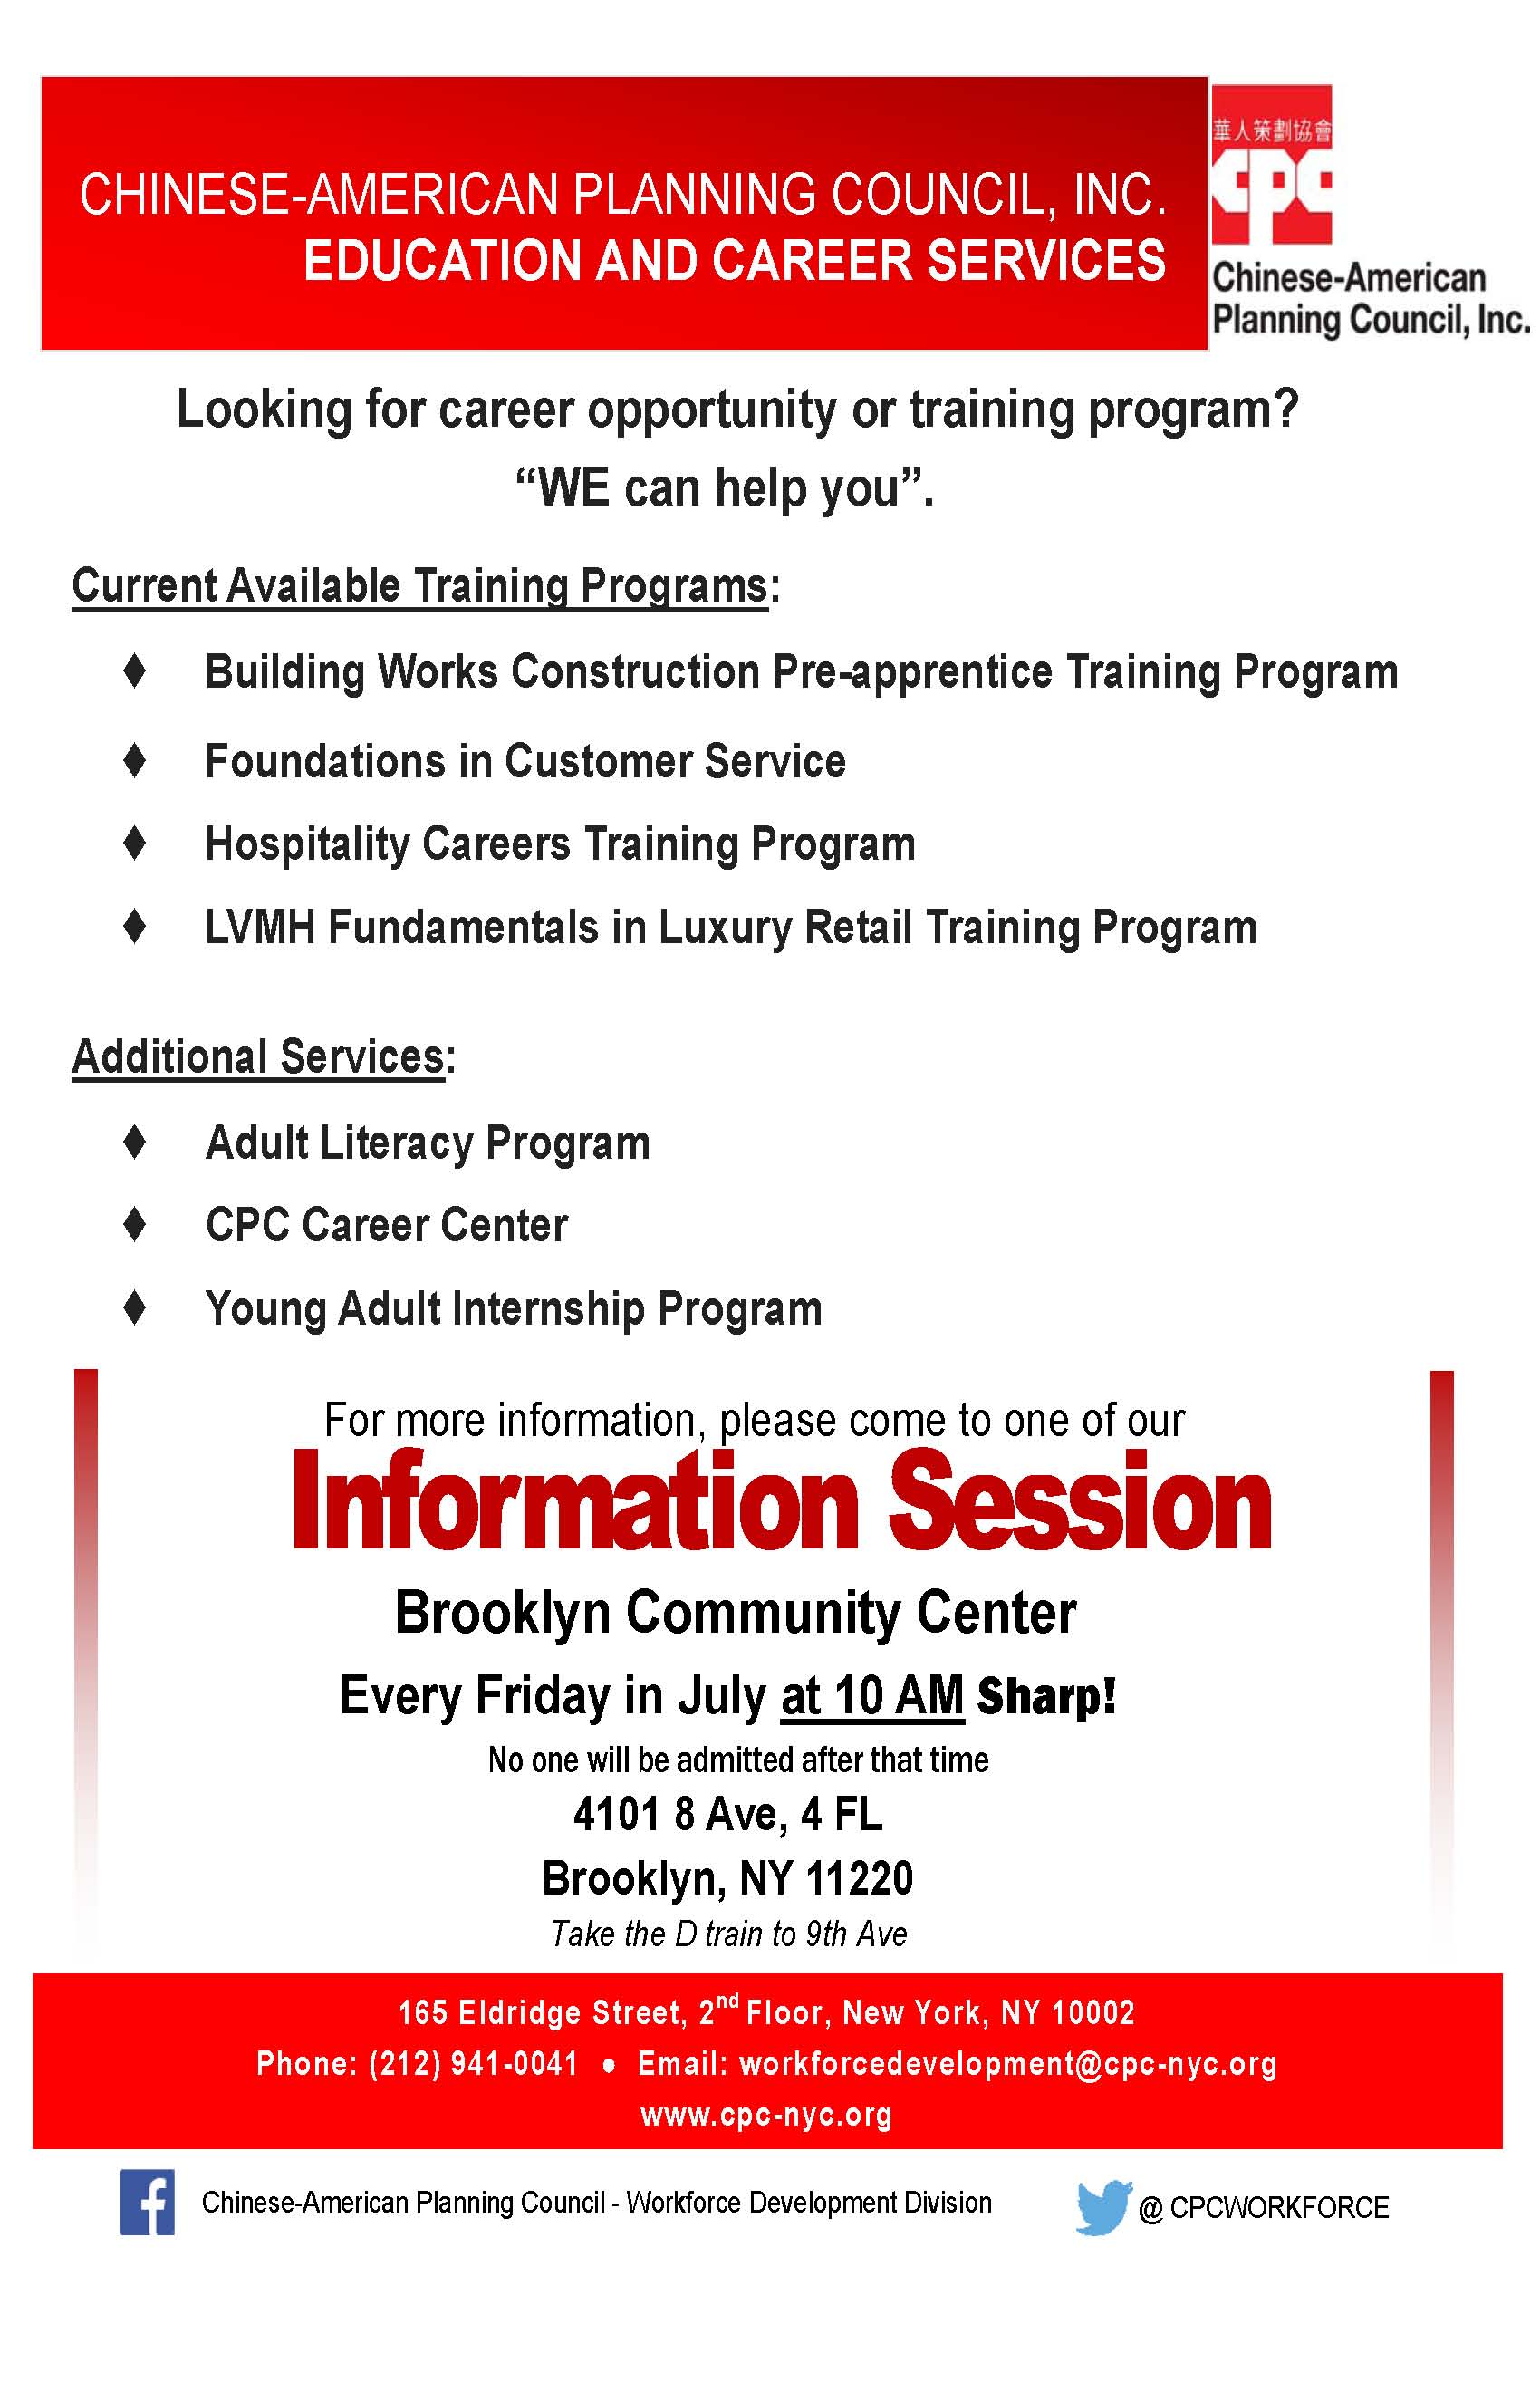 Education and Career Services Brooklyn Information Session